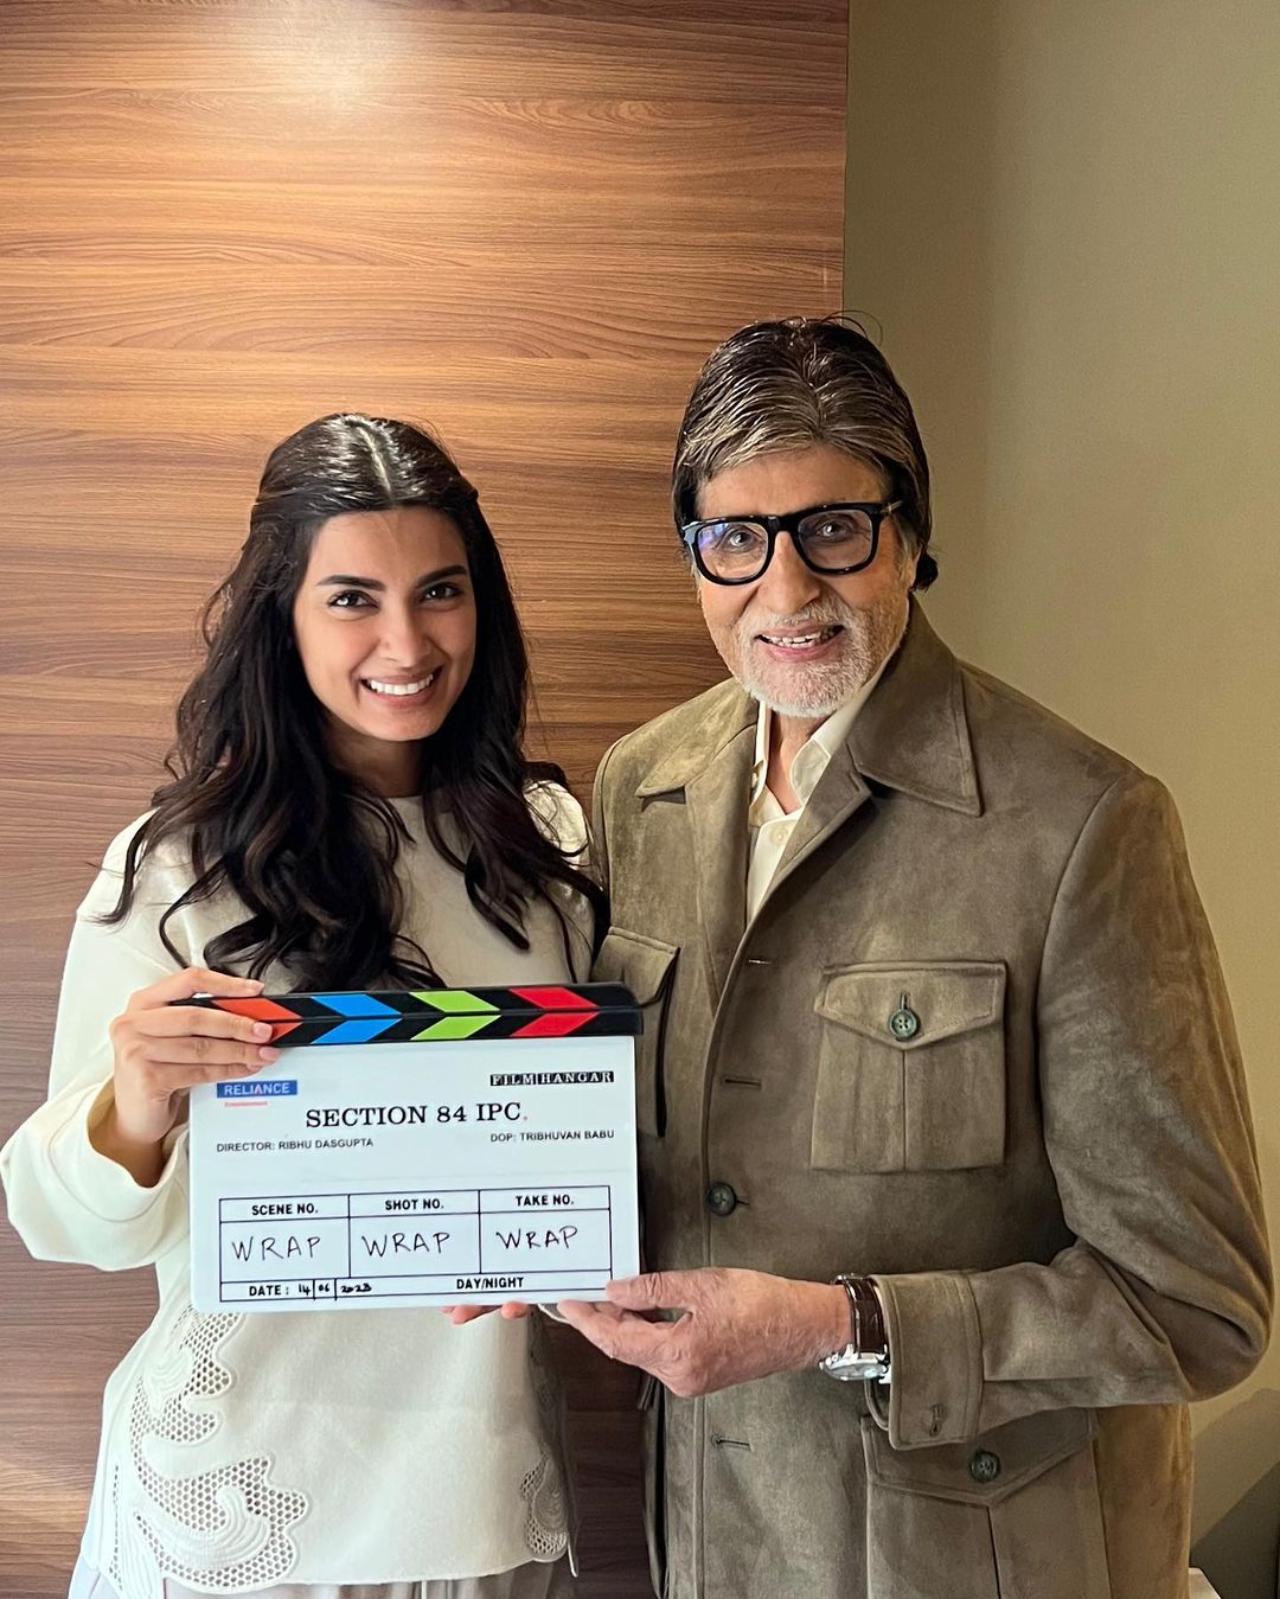 The actress said, “And it's a WRAP. On what has been an incredibly special journey for me. Before we began shooting #Section84, I was beyond excited to be working with @amitabhbachchan for the first time, but also so damn nervous!! But now that we've been through a film together I can safely say, it has been one of the most enriching experiences of my career. As an actor, I finally know what it means to 'BE' in a scene. Mr. Bachchan allows you to do that, and gives you space to do so much more. Watching and observing him is like witnessing a masterclass